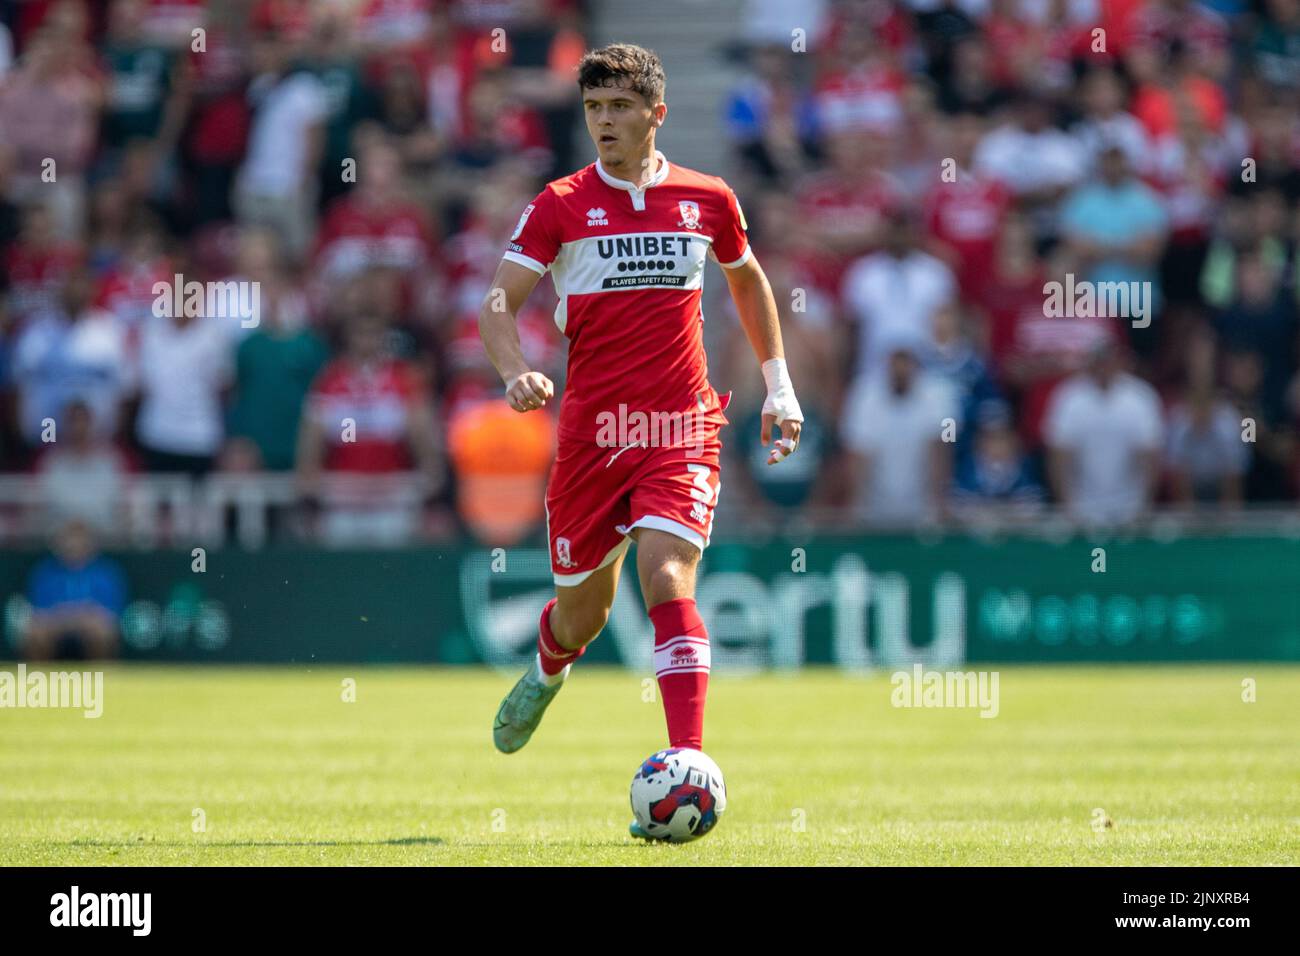 Ryan Giles #3 of Middlesbrough on the ball during the game  in Middlesbrough, United Kingdom on 8/14/2022. (Photo by James Heaton/News Images/Sipa USA) Stock Photo